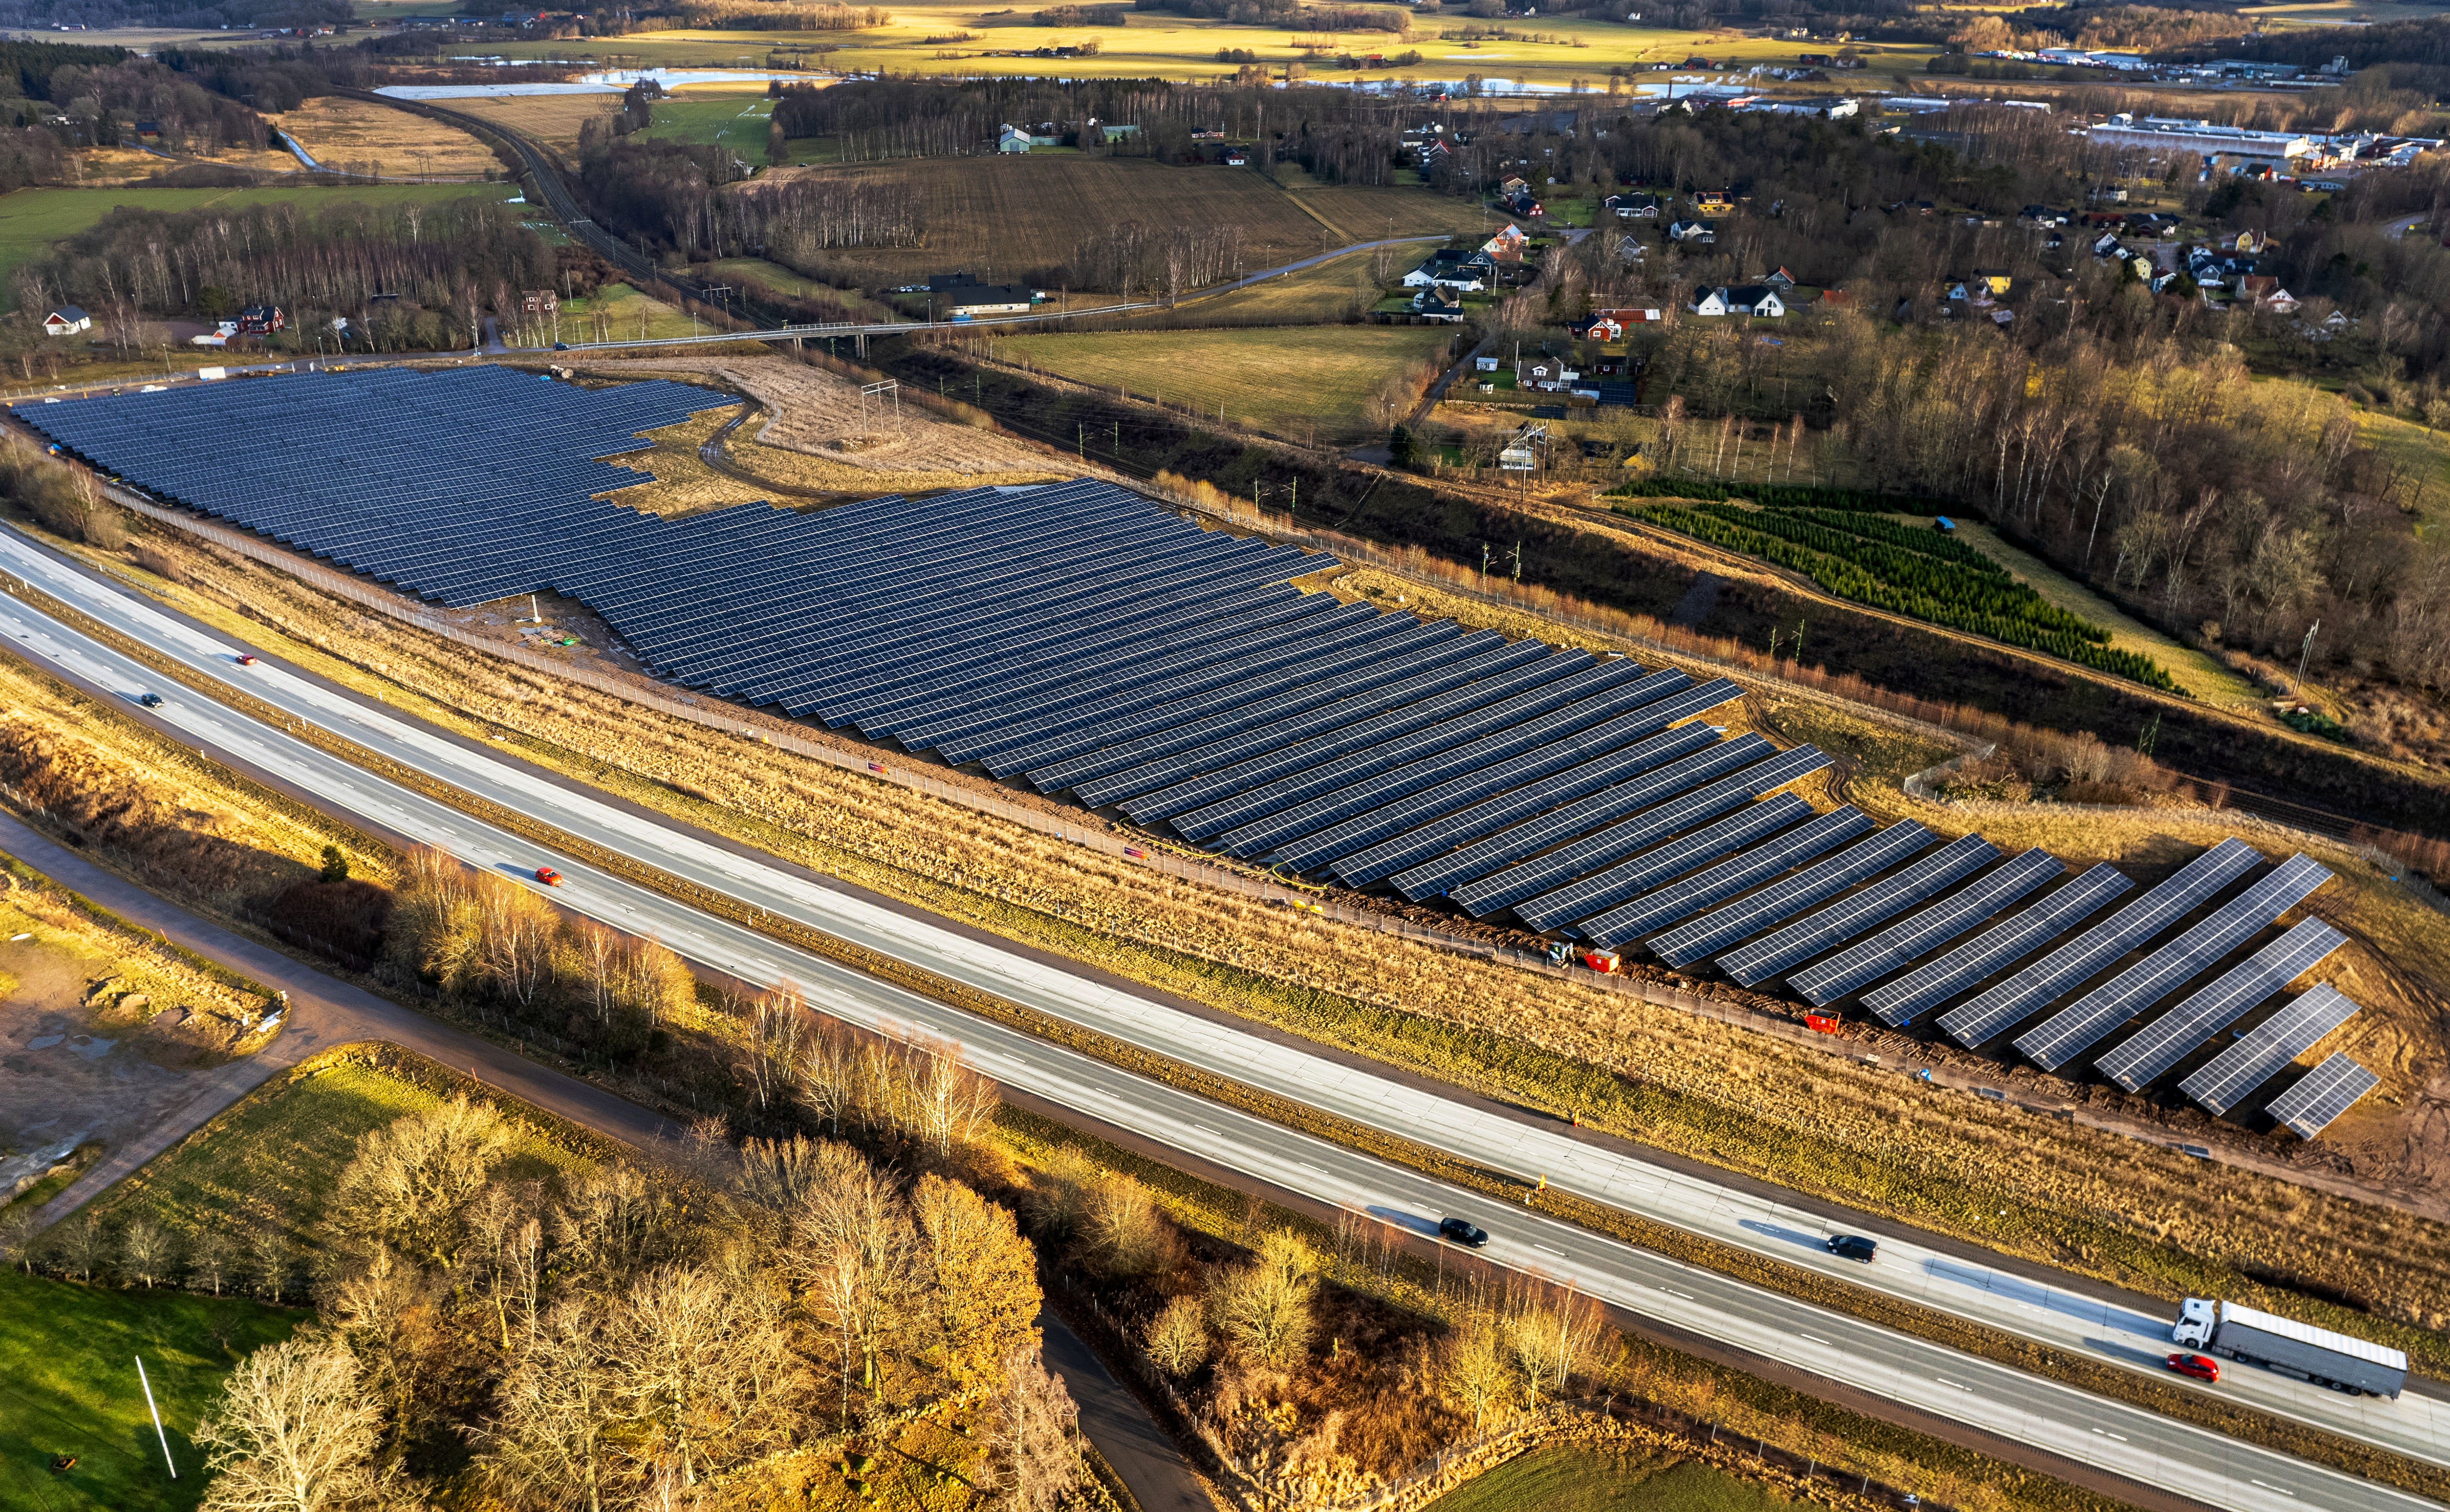 Soltech retains and further develops solar park portfolio which now exceeds 2,000 MWp